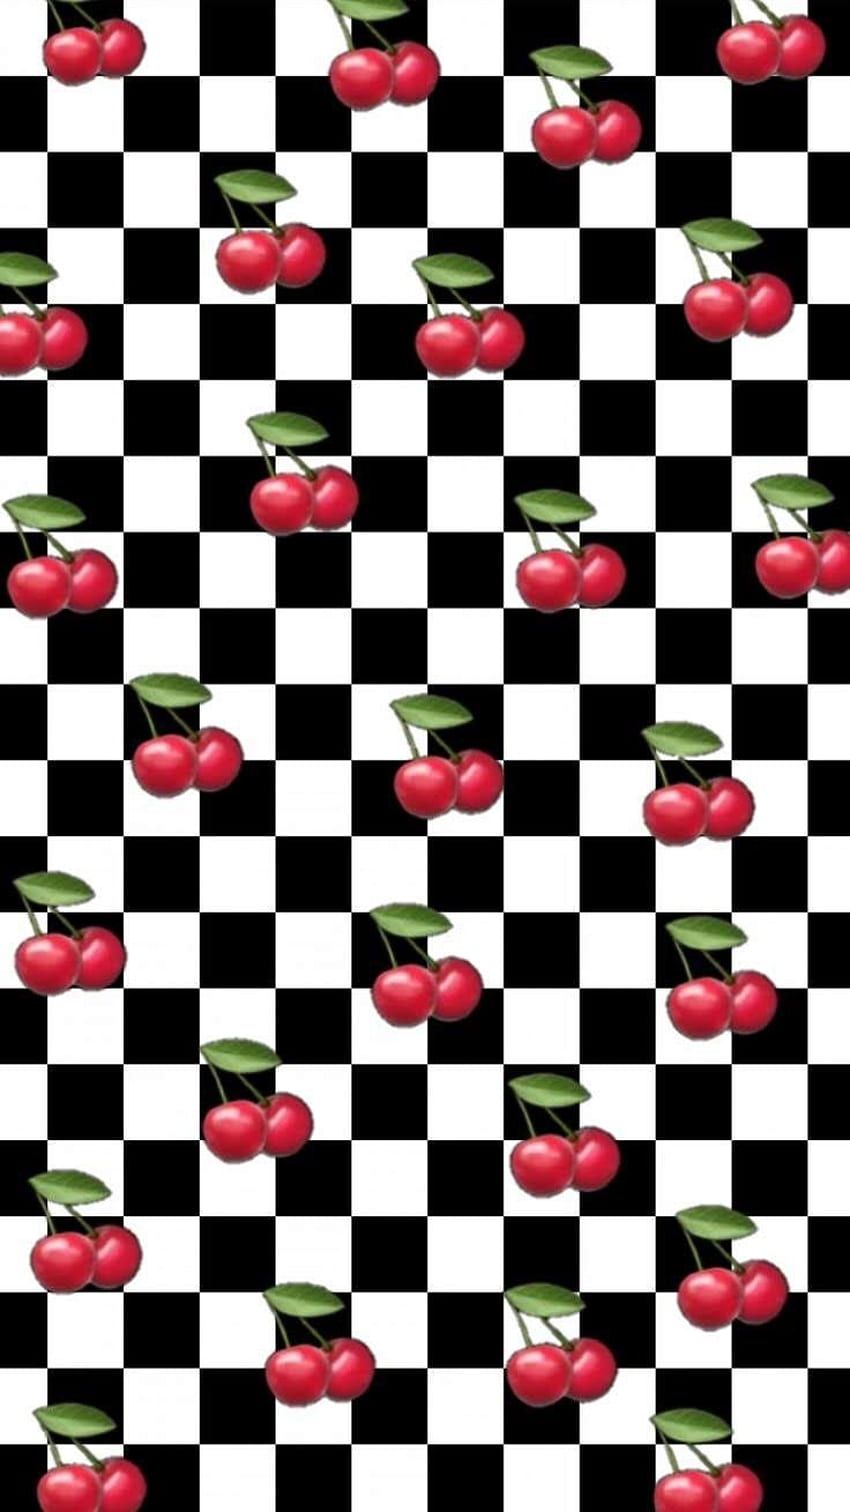 IPhone wallpaper cherries, black and white, pattern, checkered, red, green, cute, girly, aesthetic, background, phone, cute, phone, phone background - Cherry, checkered